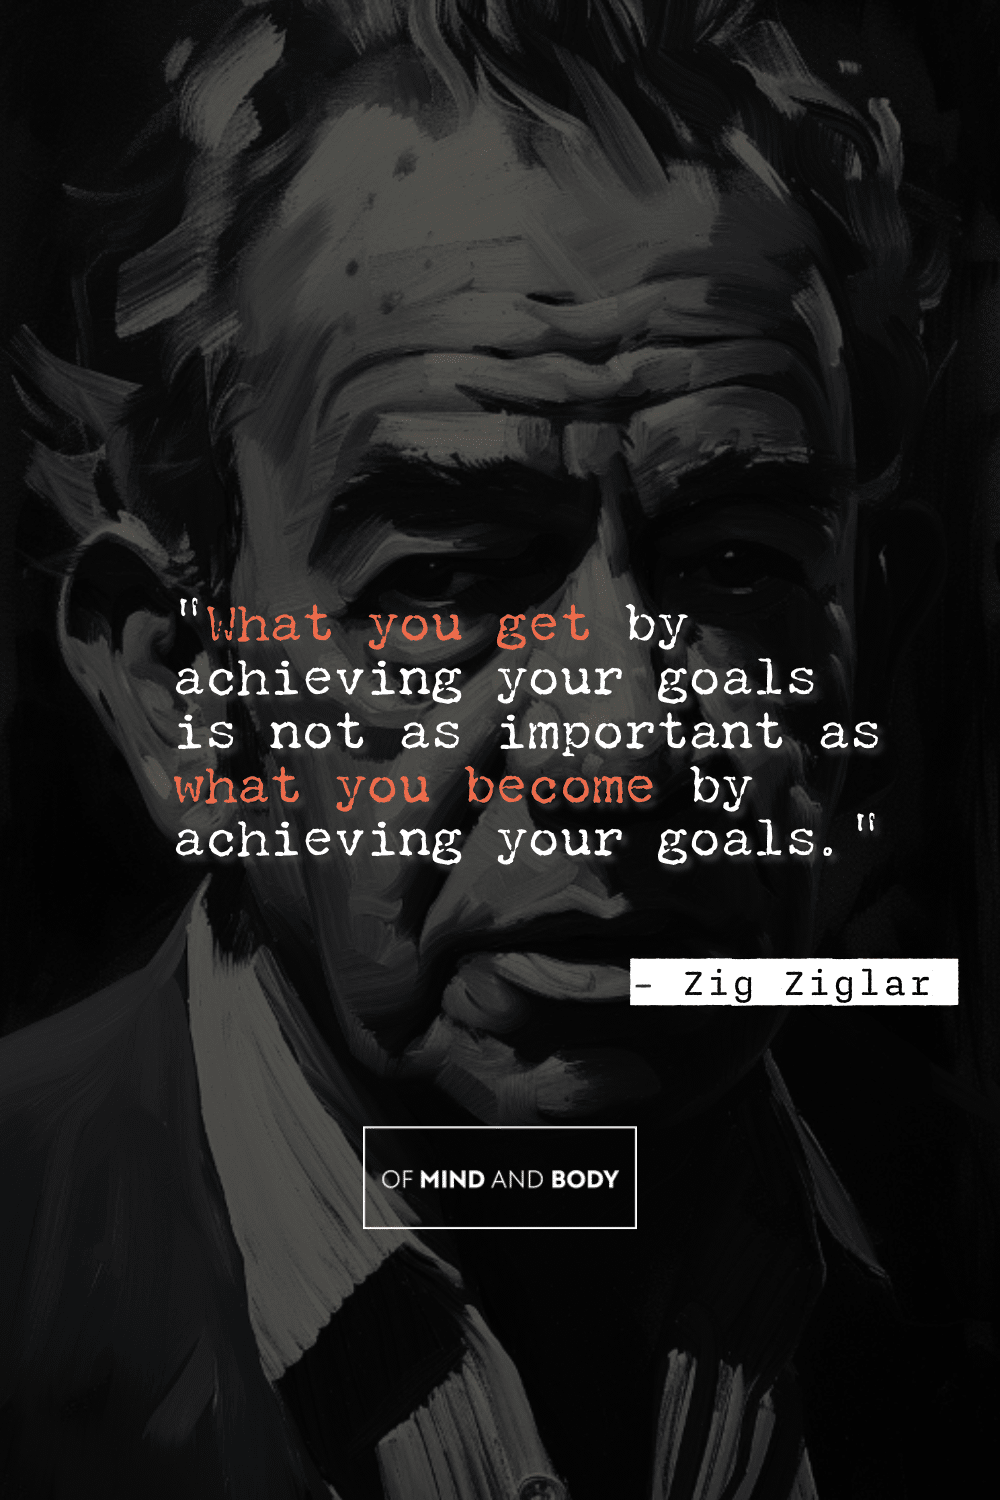 Quotes on Self Improvement - "What you get by achieving your goals is not as important as what you become by achieving your goals."